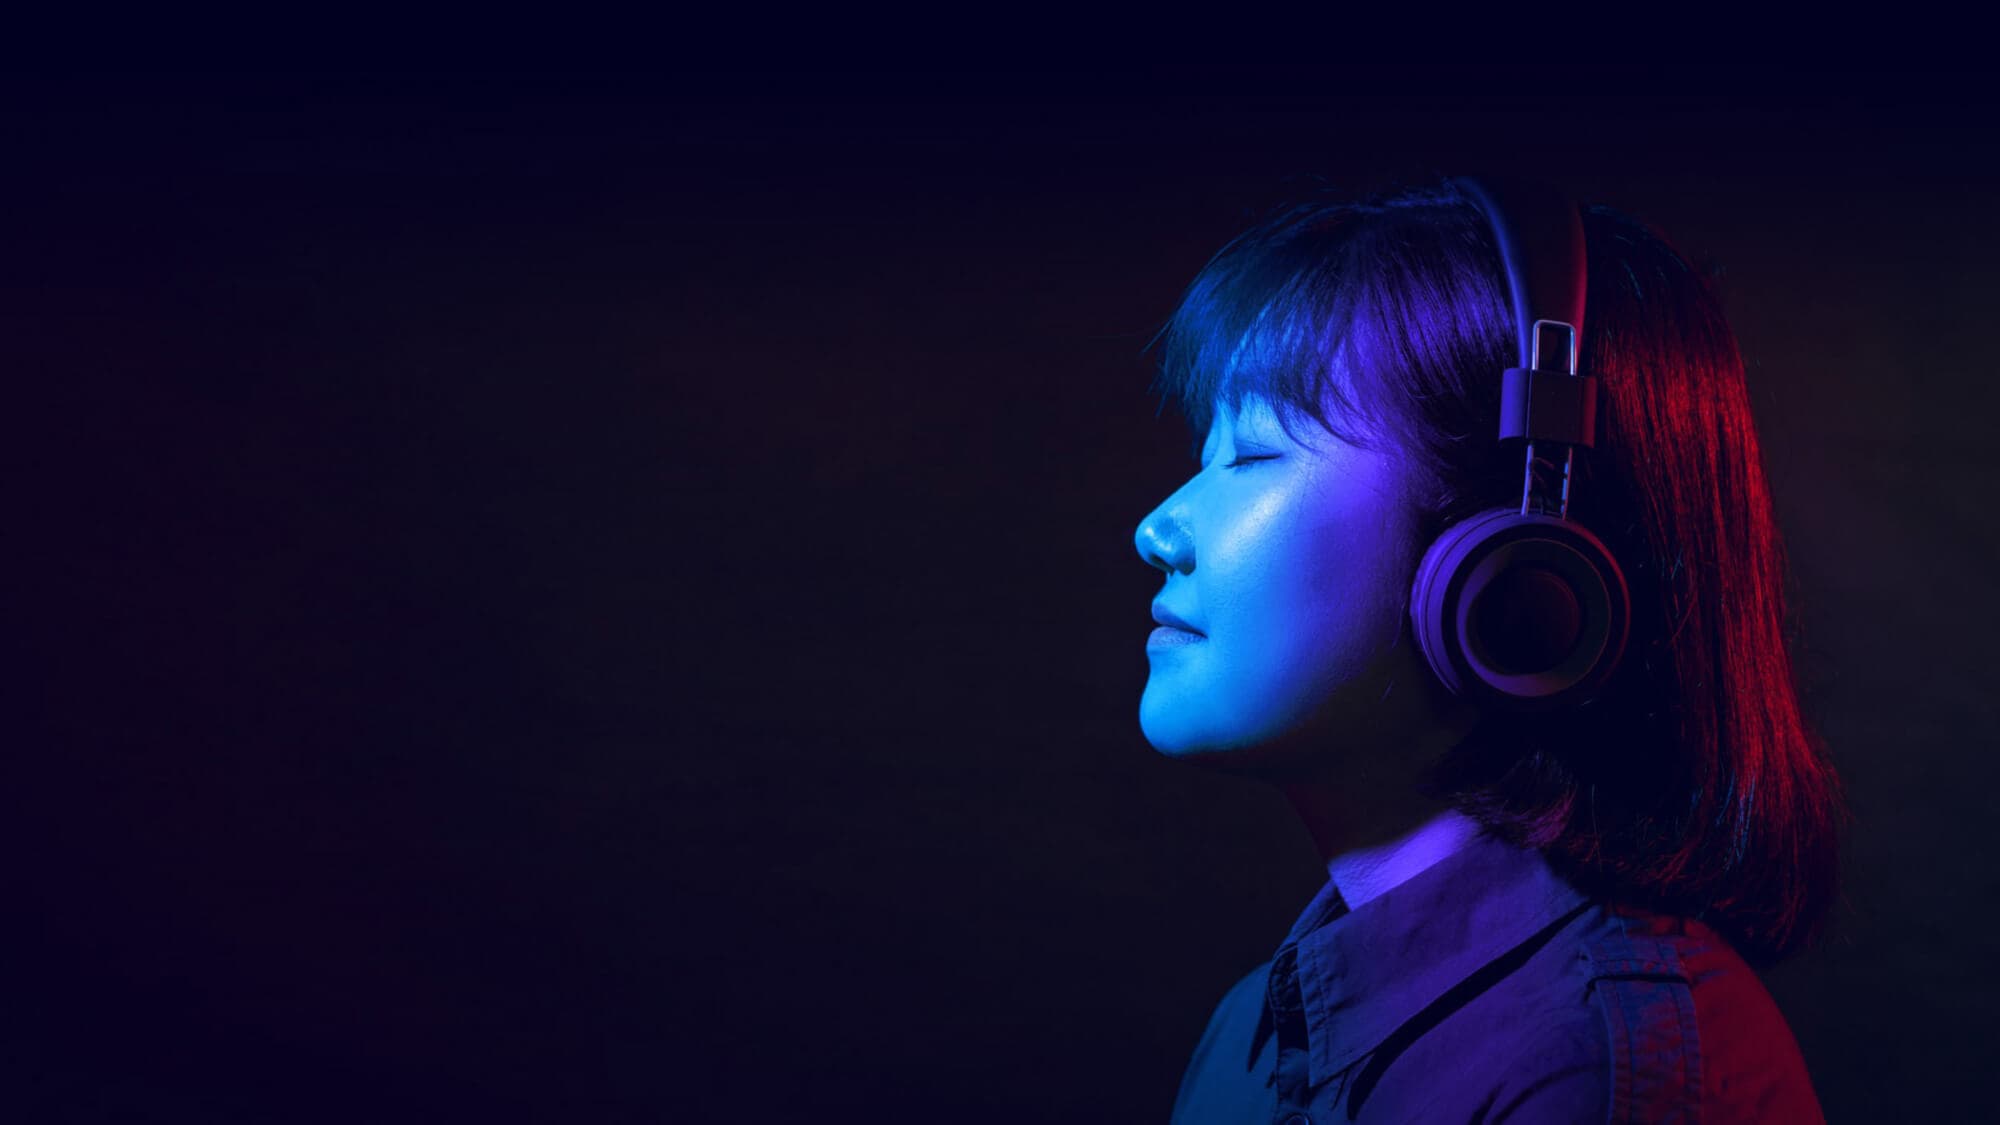 A woman wearing headphones in front of a dark background.